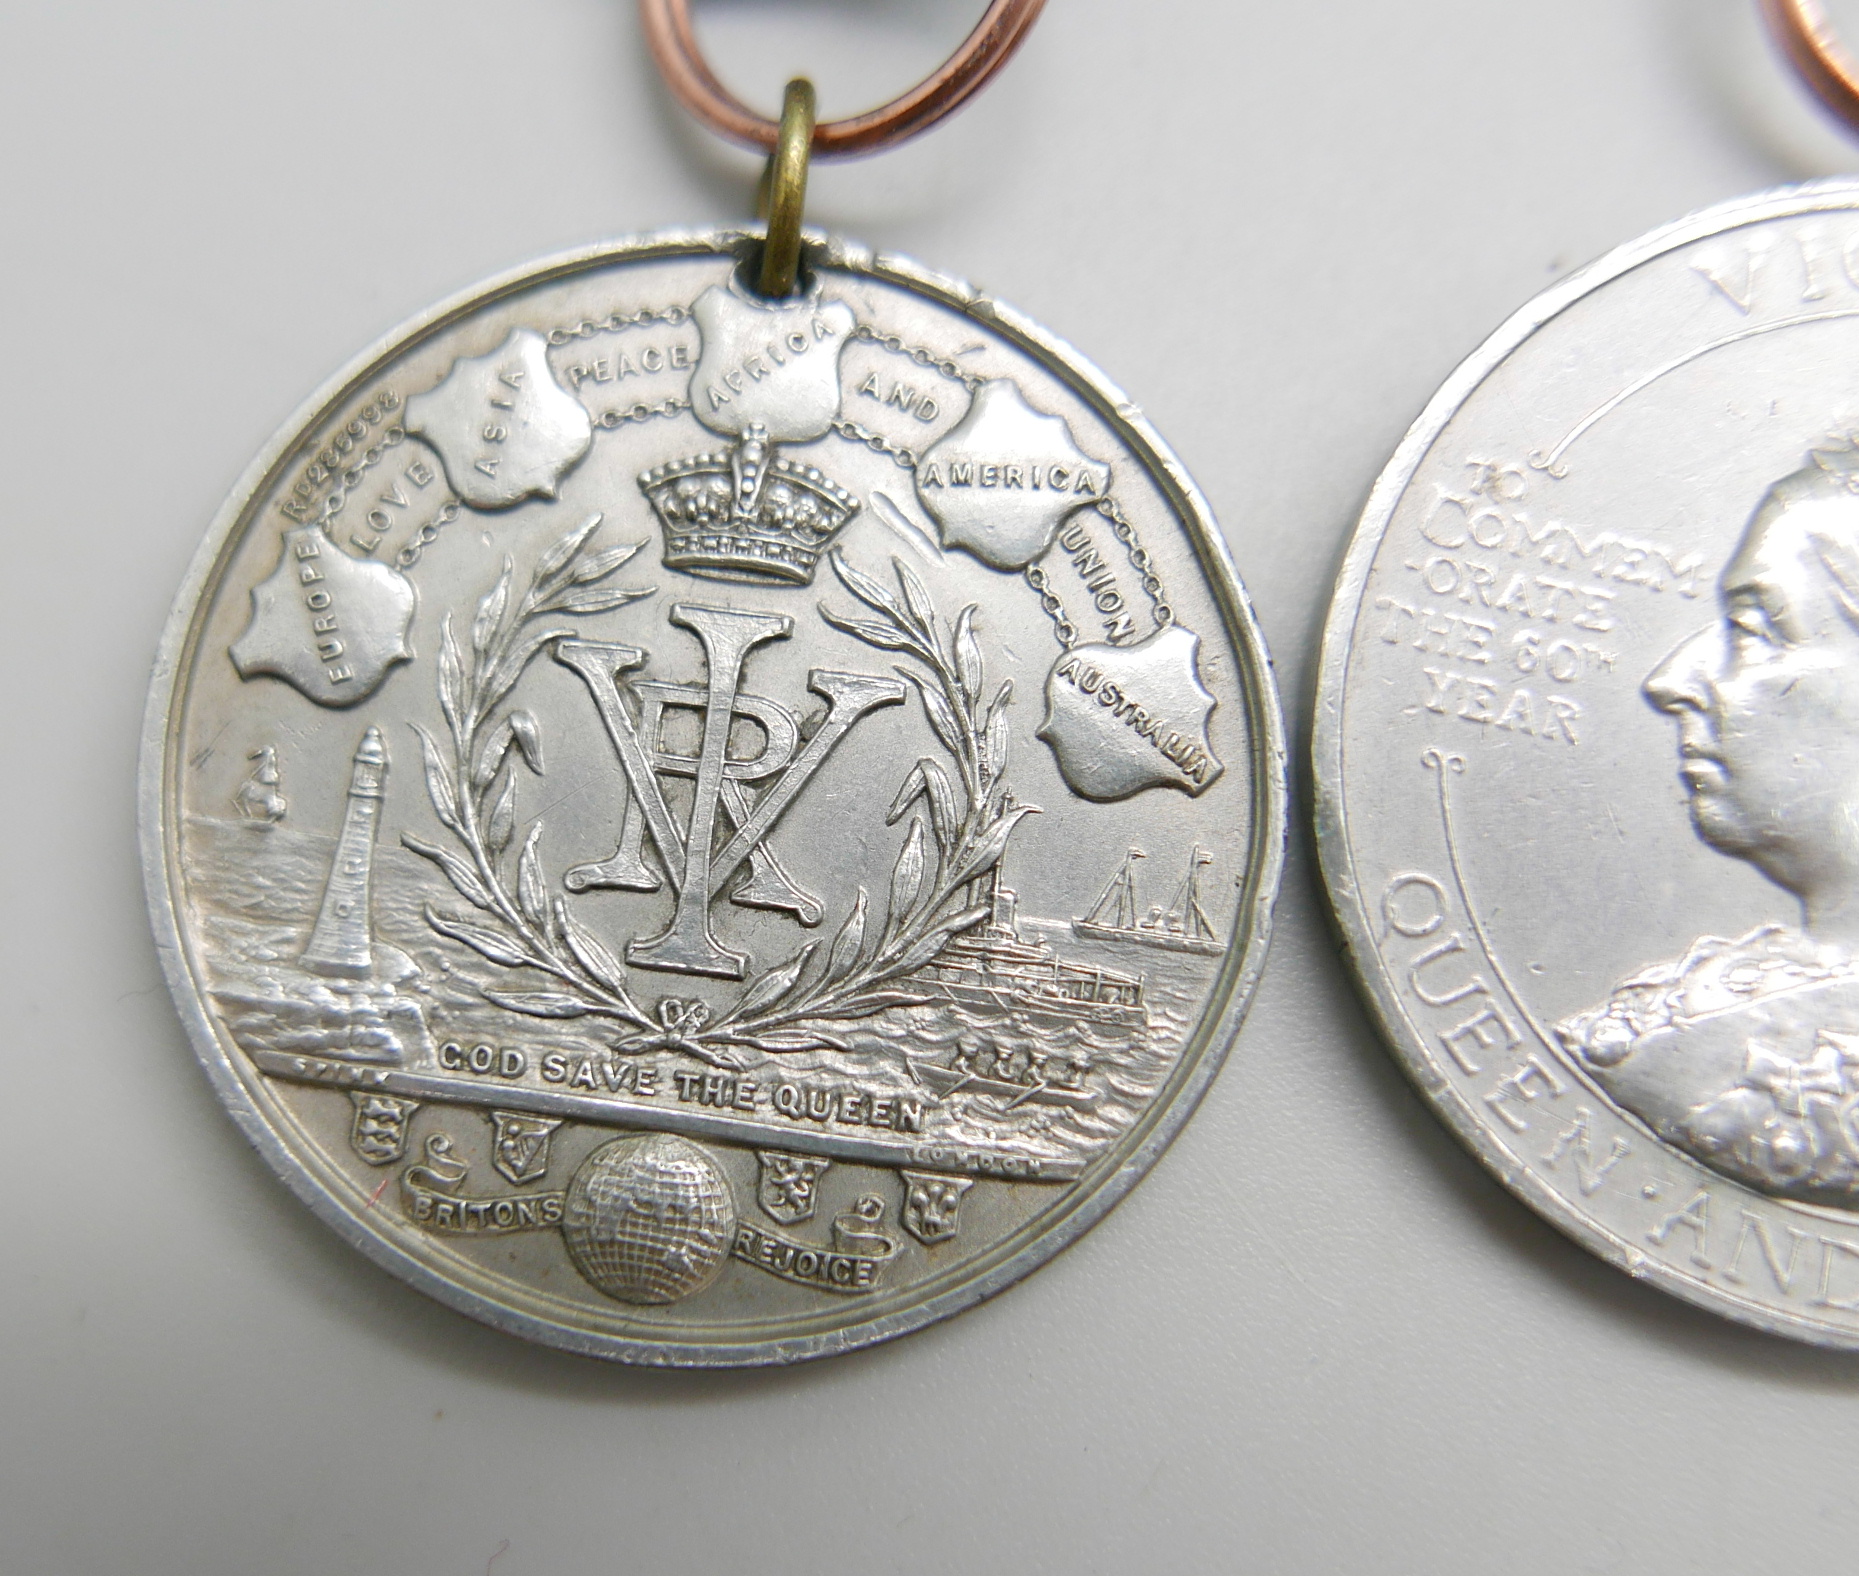 Six early 20th Century commemorative medallions and a silver fob medal - Image 2 of 4